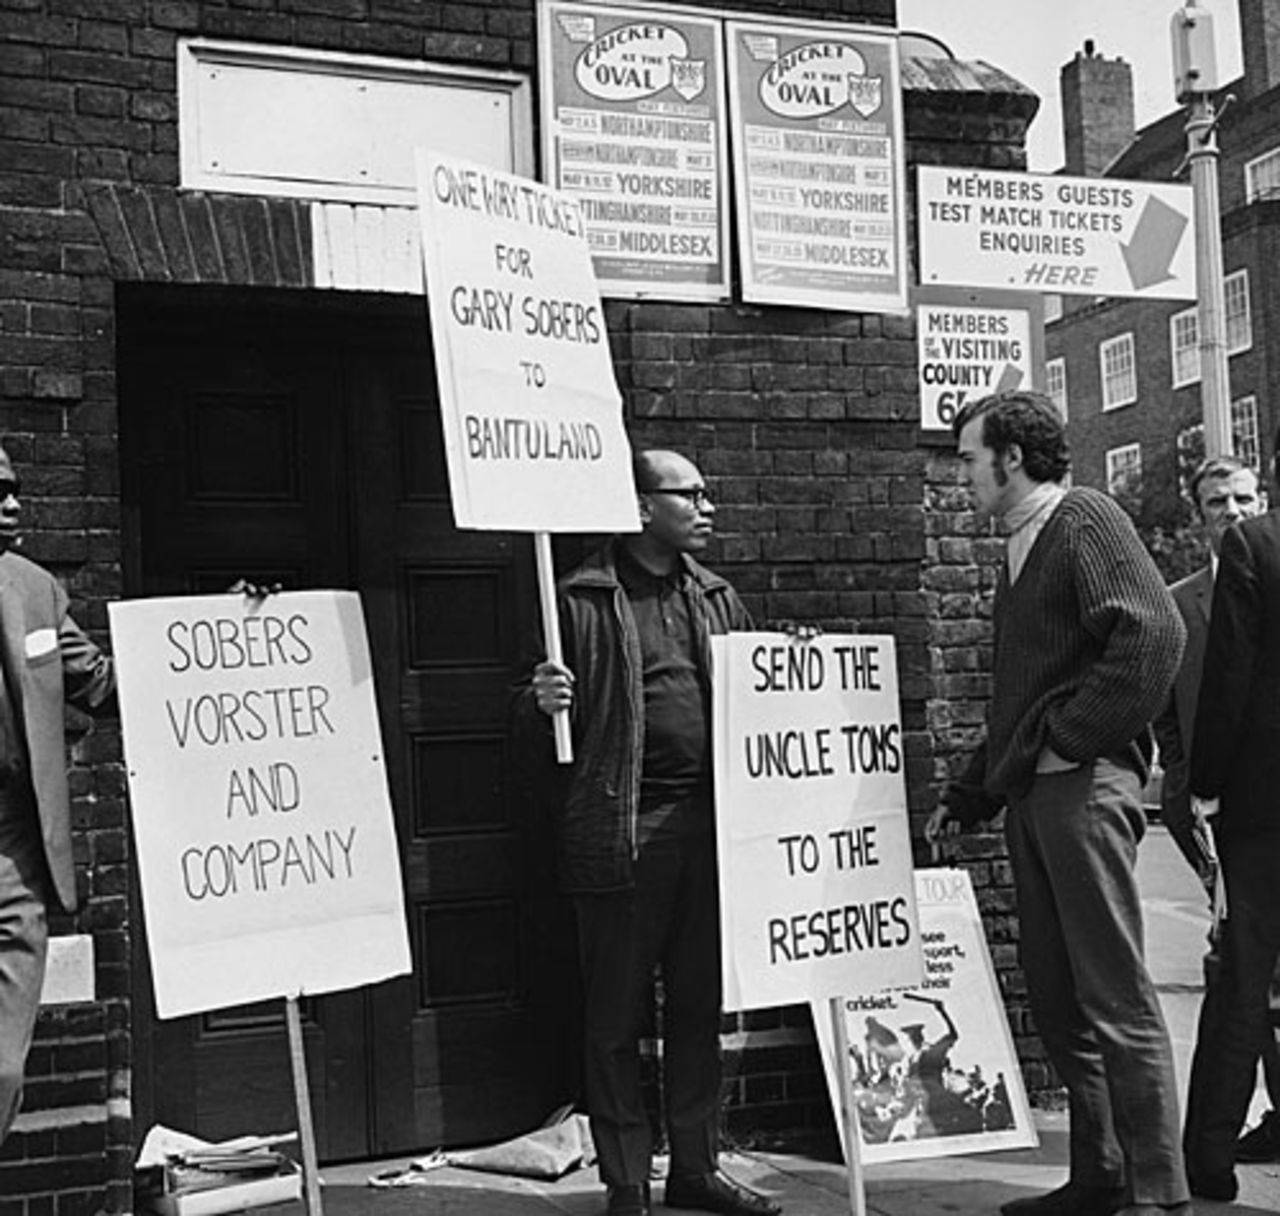 Peter Hain, leader of the campaign to stop the South African tour ('Stop the 70s tour') chats to a demonstrator during a demo outside The Oval, May 20, 1970